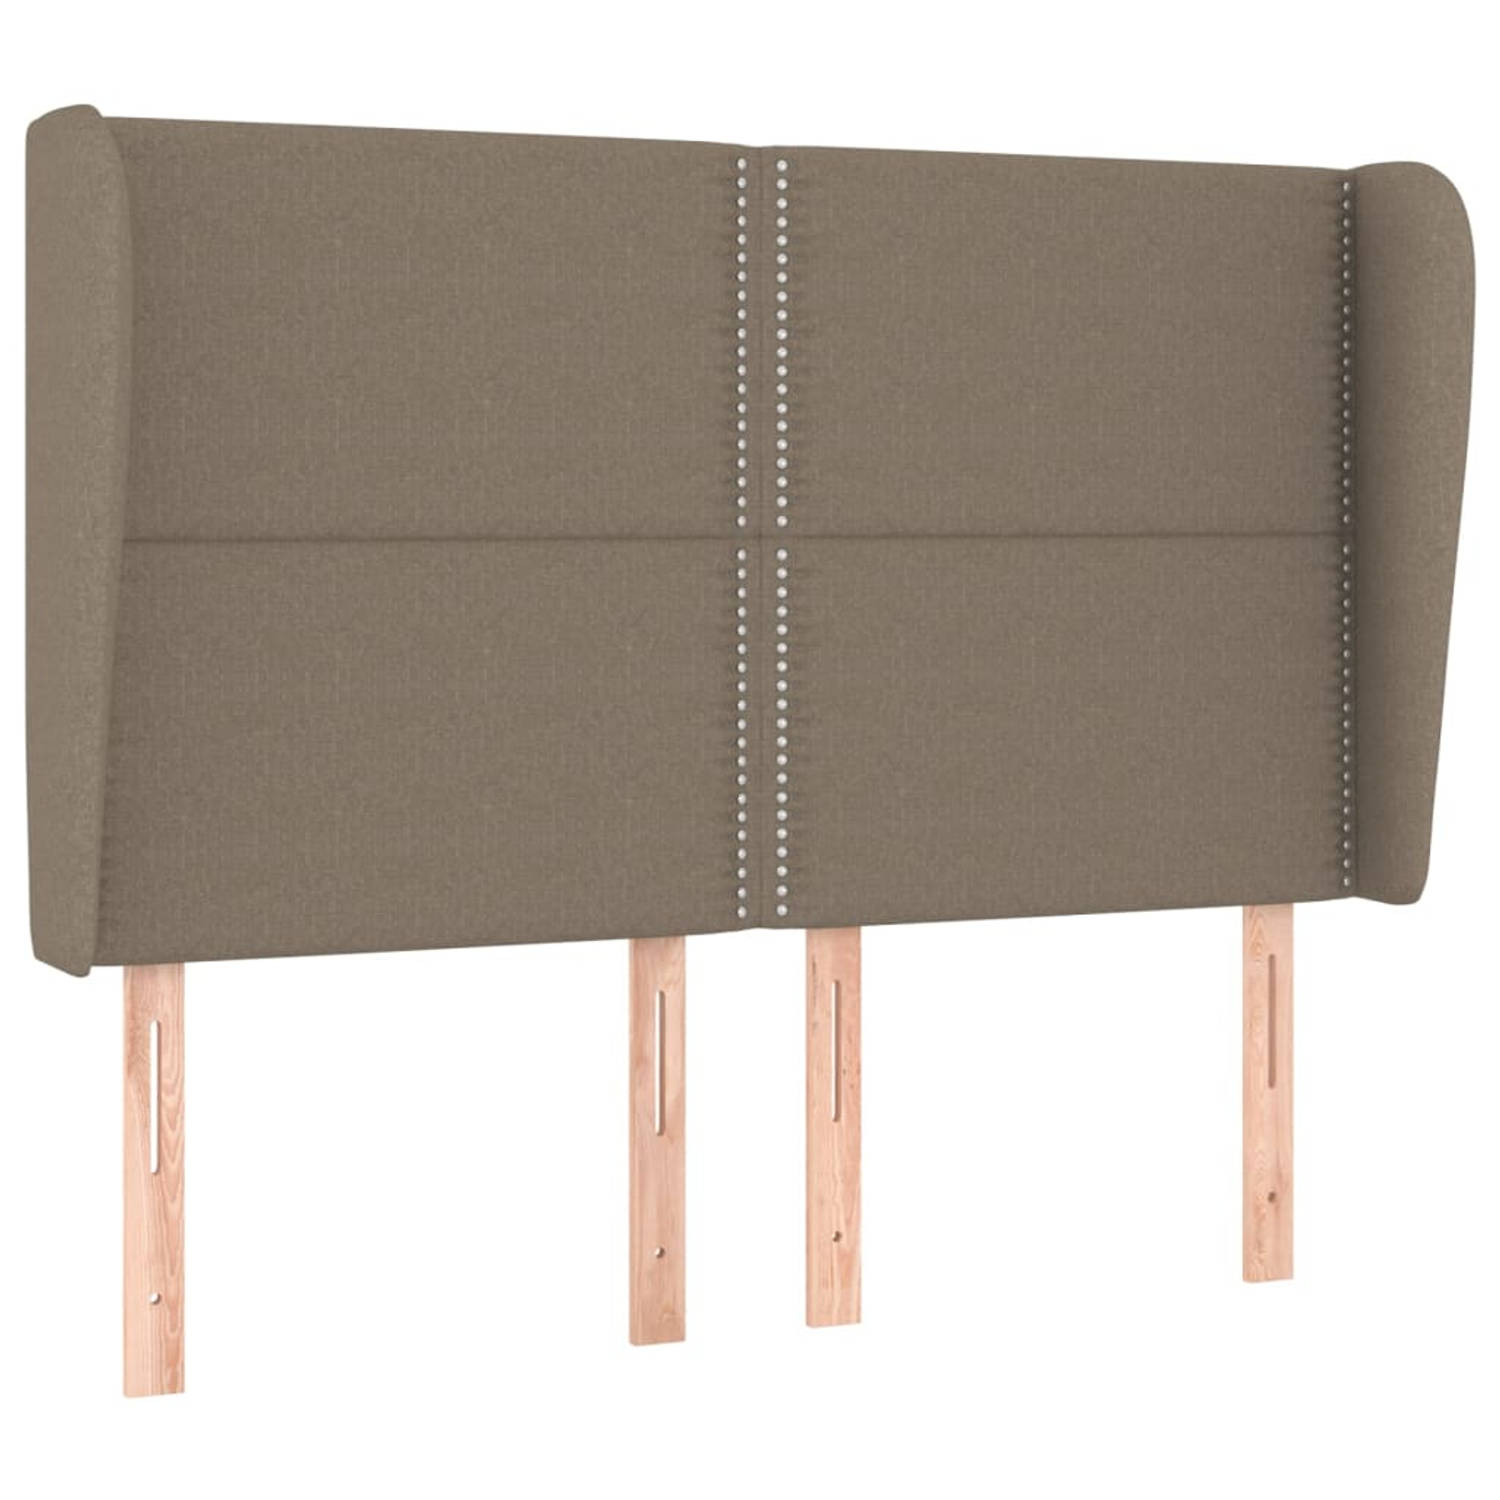 The Living Store Hoofdbord - 147 x 23 x 118/128 cm - Taupe